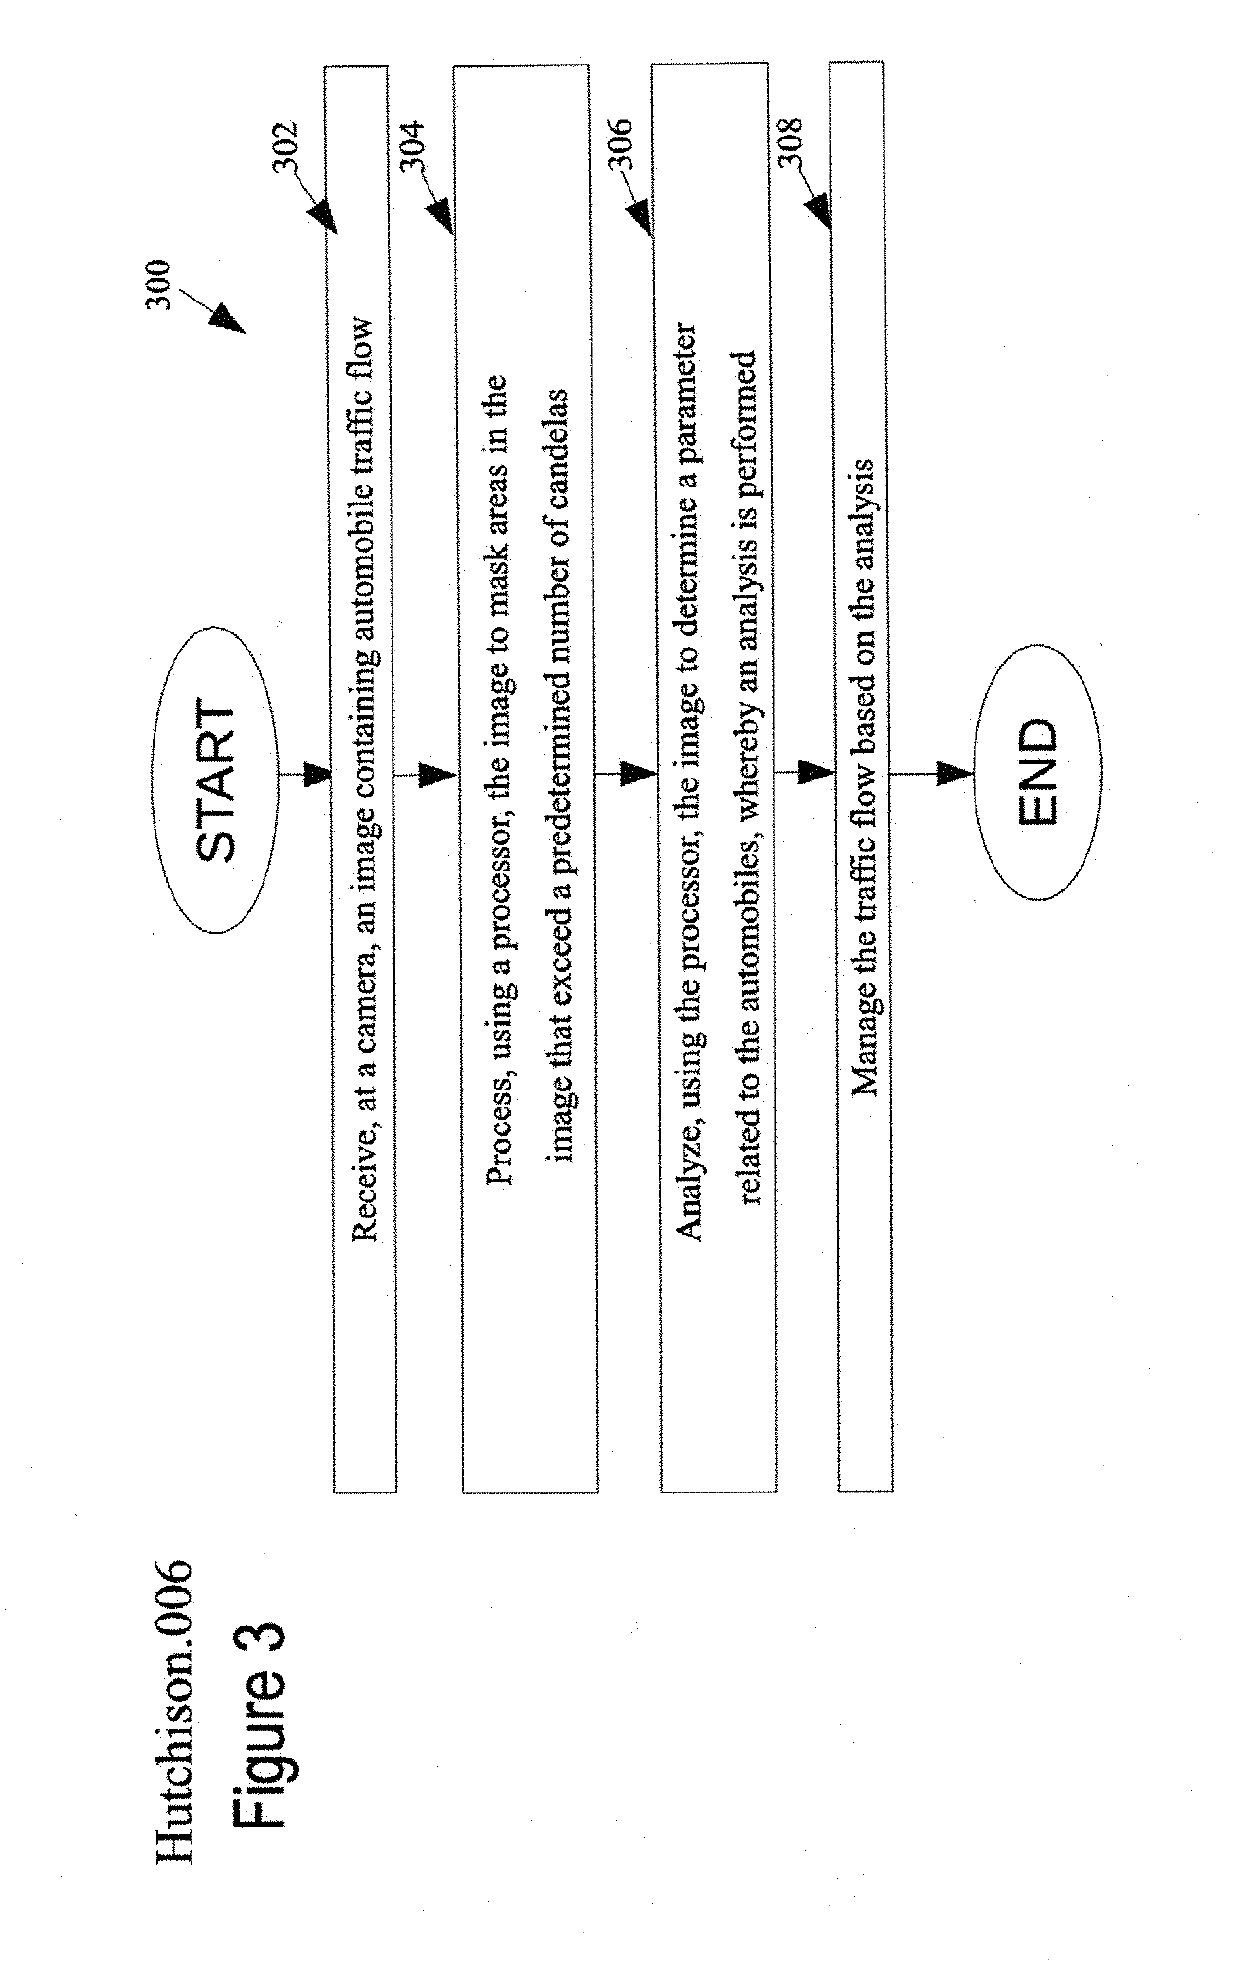 Method for increasing the accuracy of traffic cameras using optical masking technology